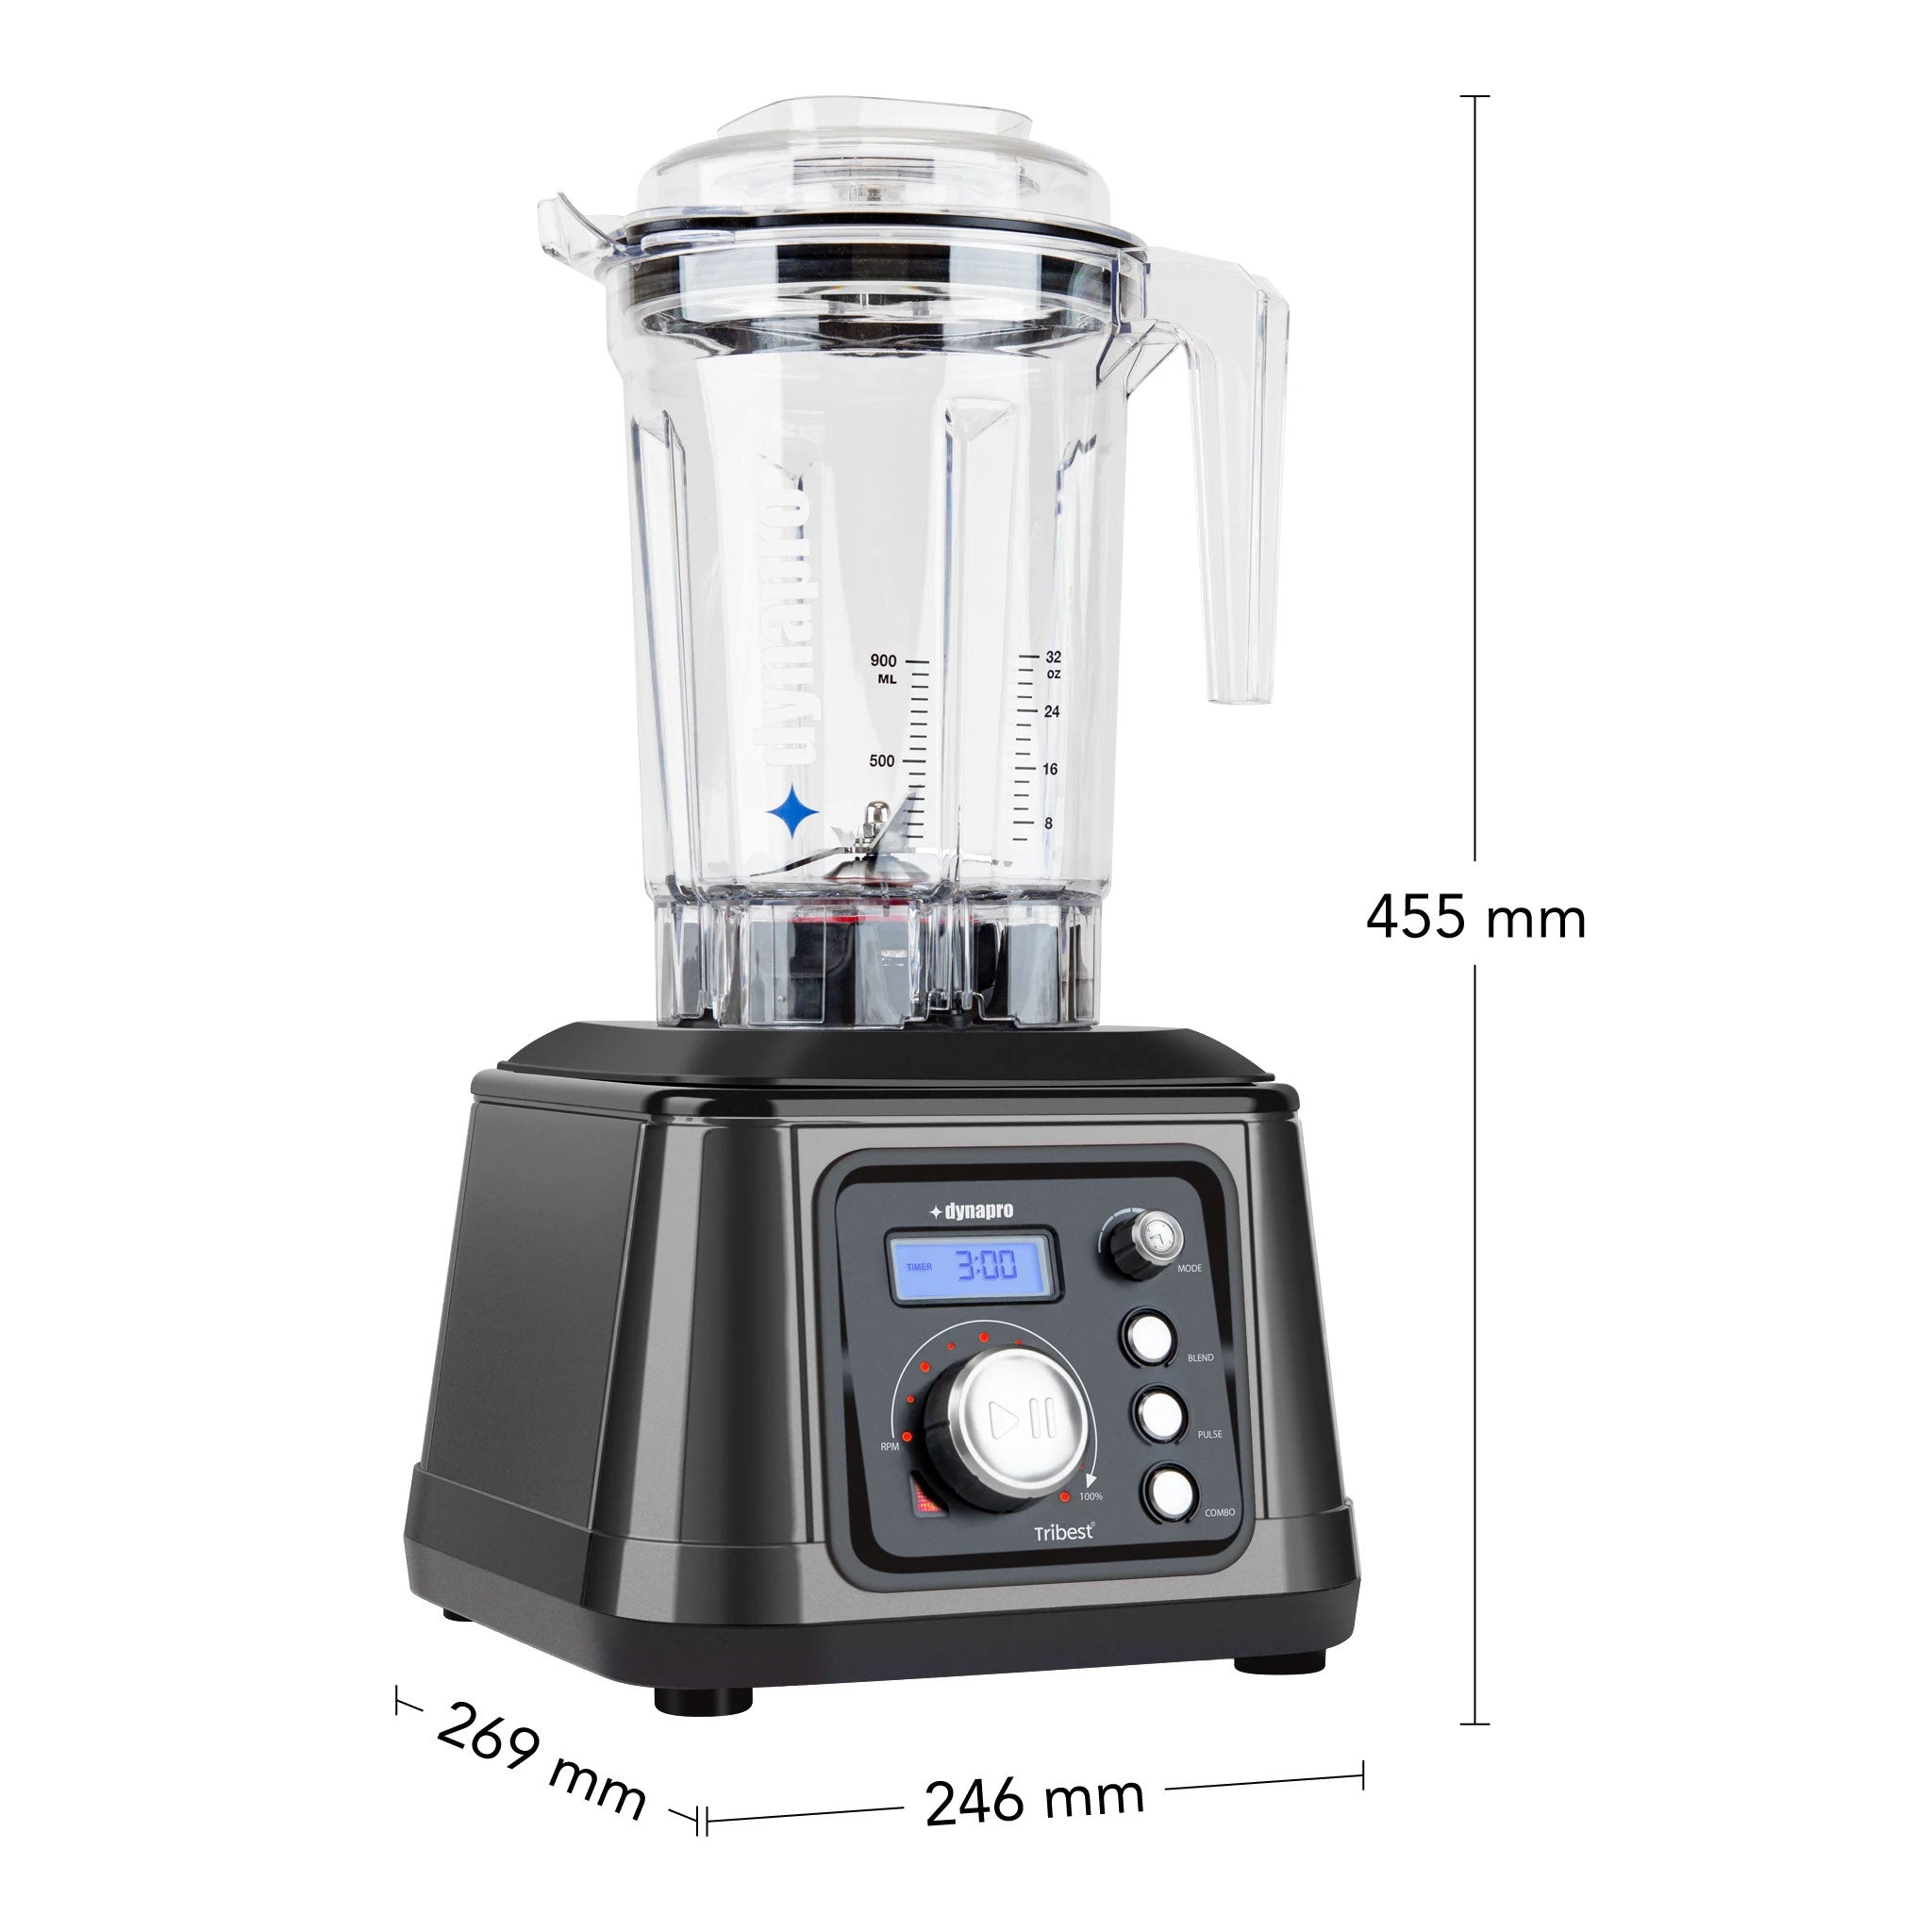 Dynapro® Commercial High-Speed Blender in Gray - Size 246 x 269 x 455 mm